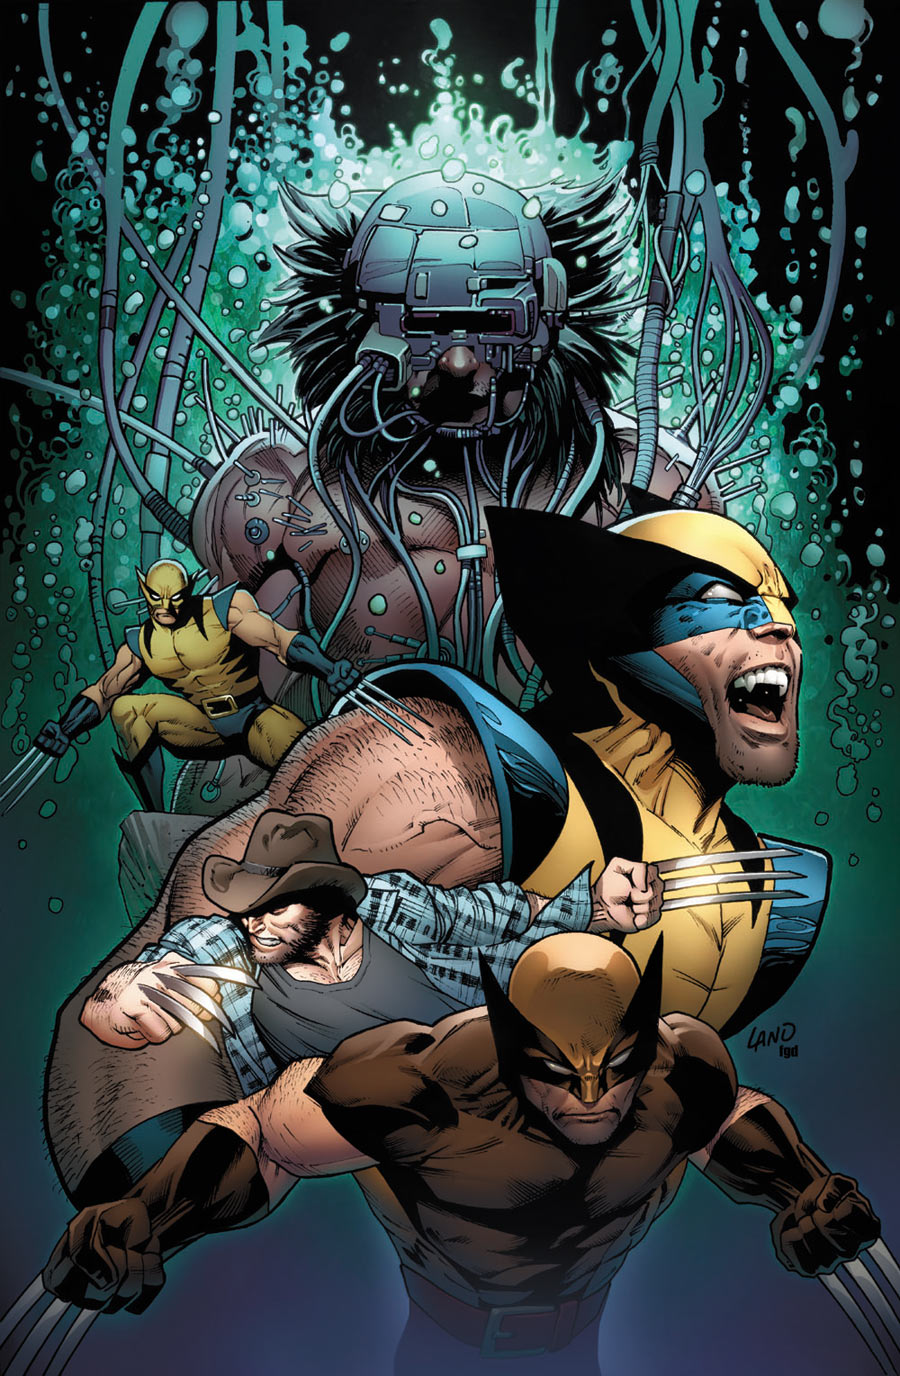 death-of-wolverine-variant-art-life-after-logan1?content-type=image%2Fjpeg